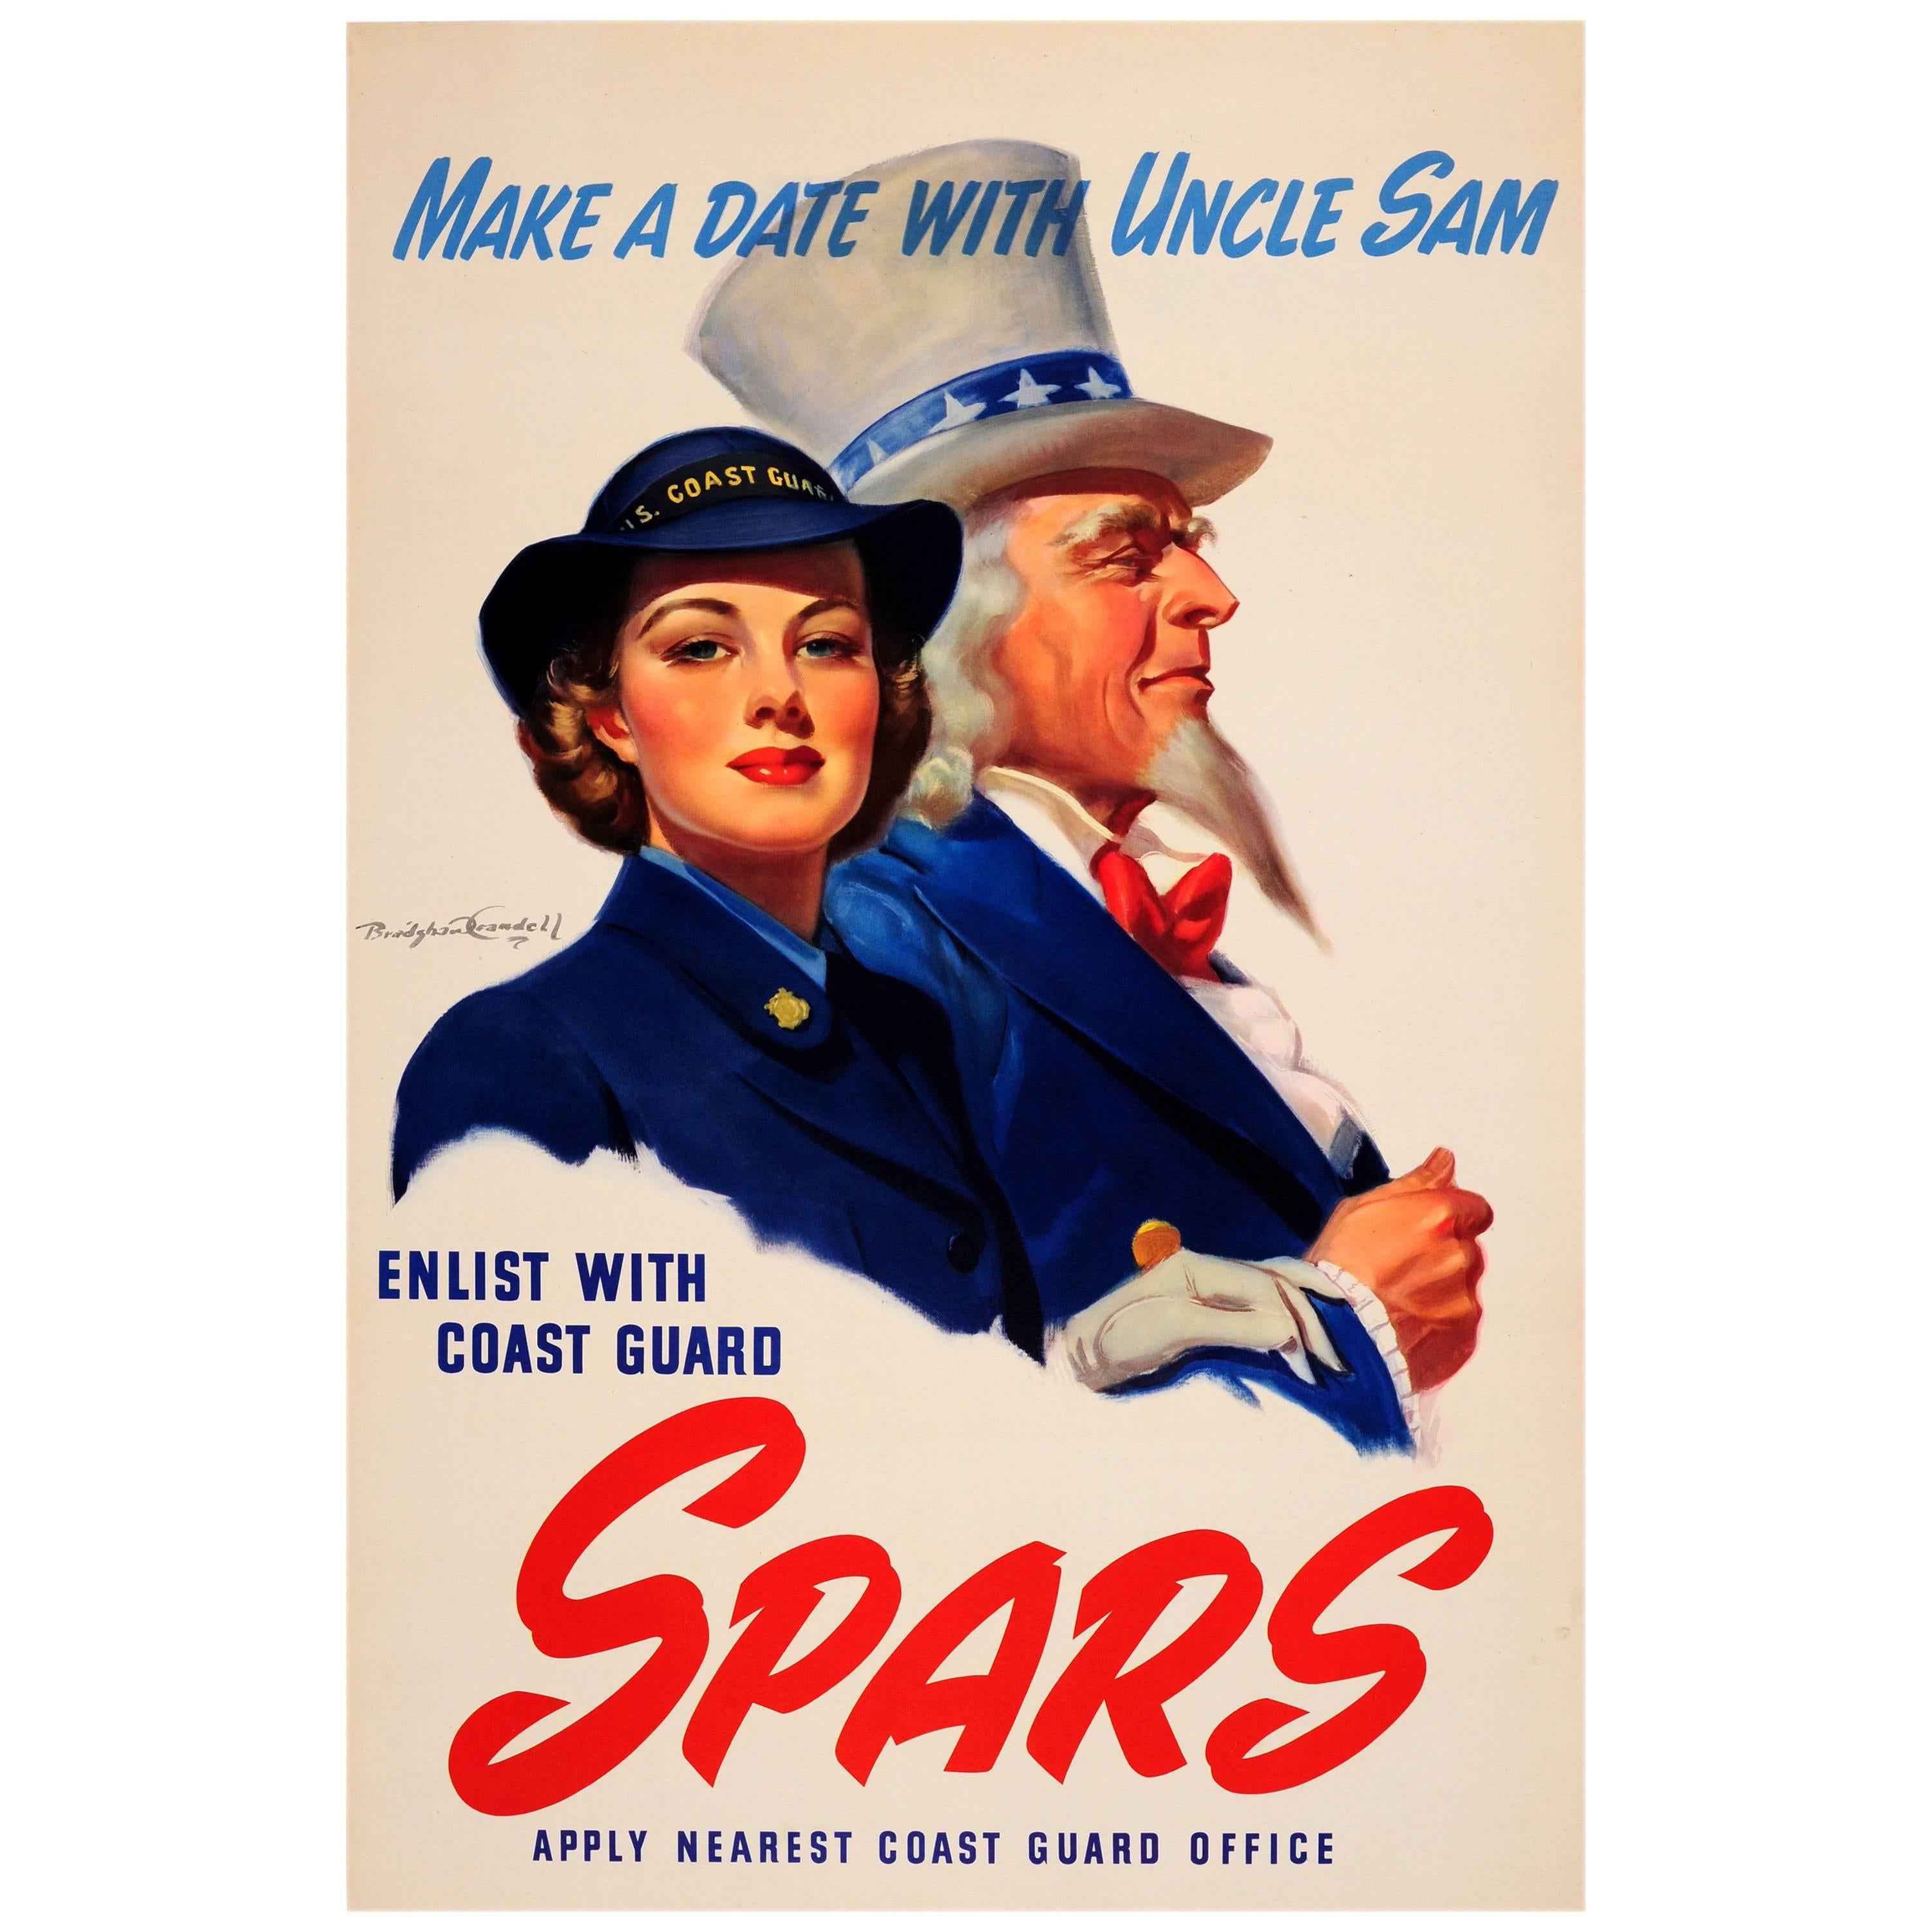 Original World War II Recruitment Poster - Make a Date with Uncle Sam USCG Spars For Sale